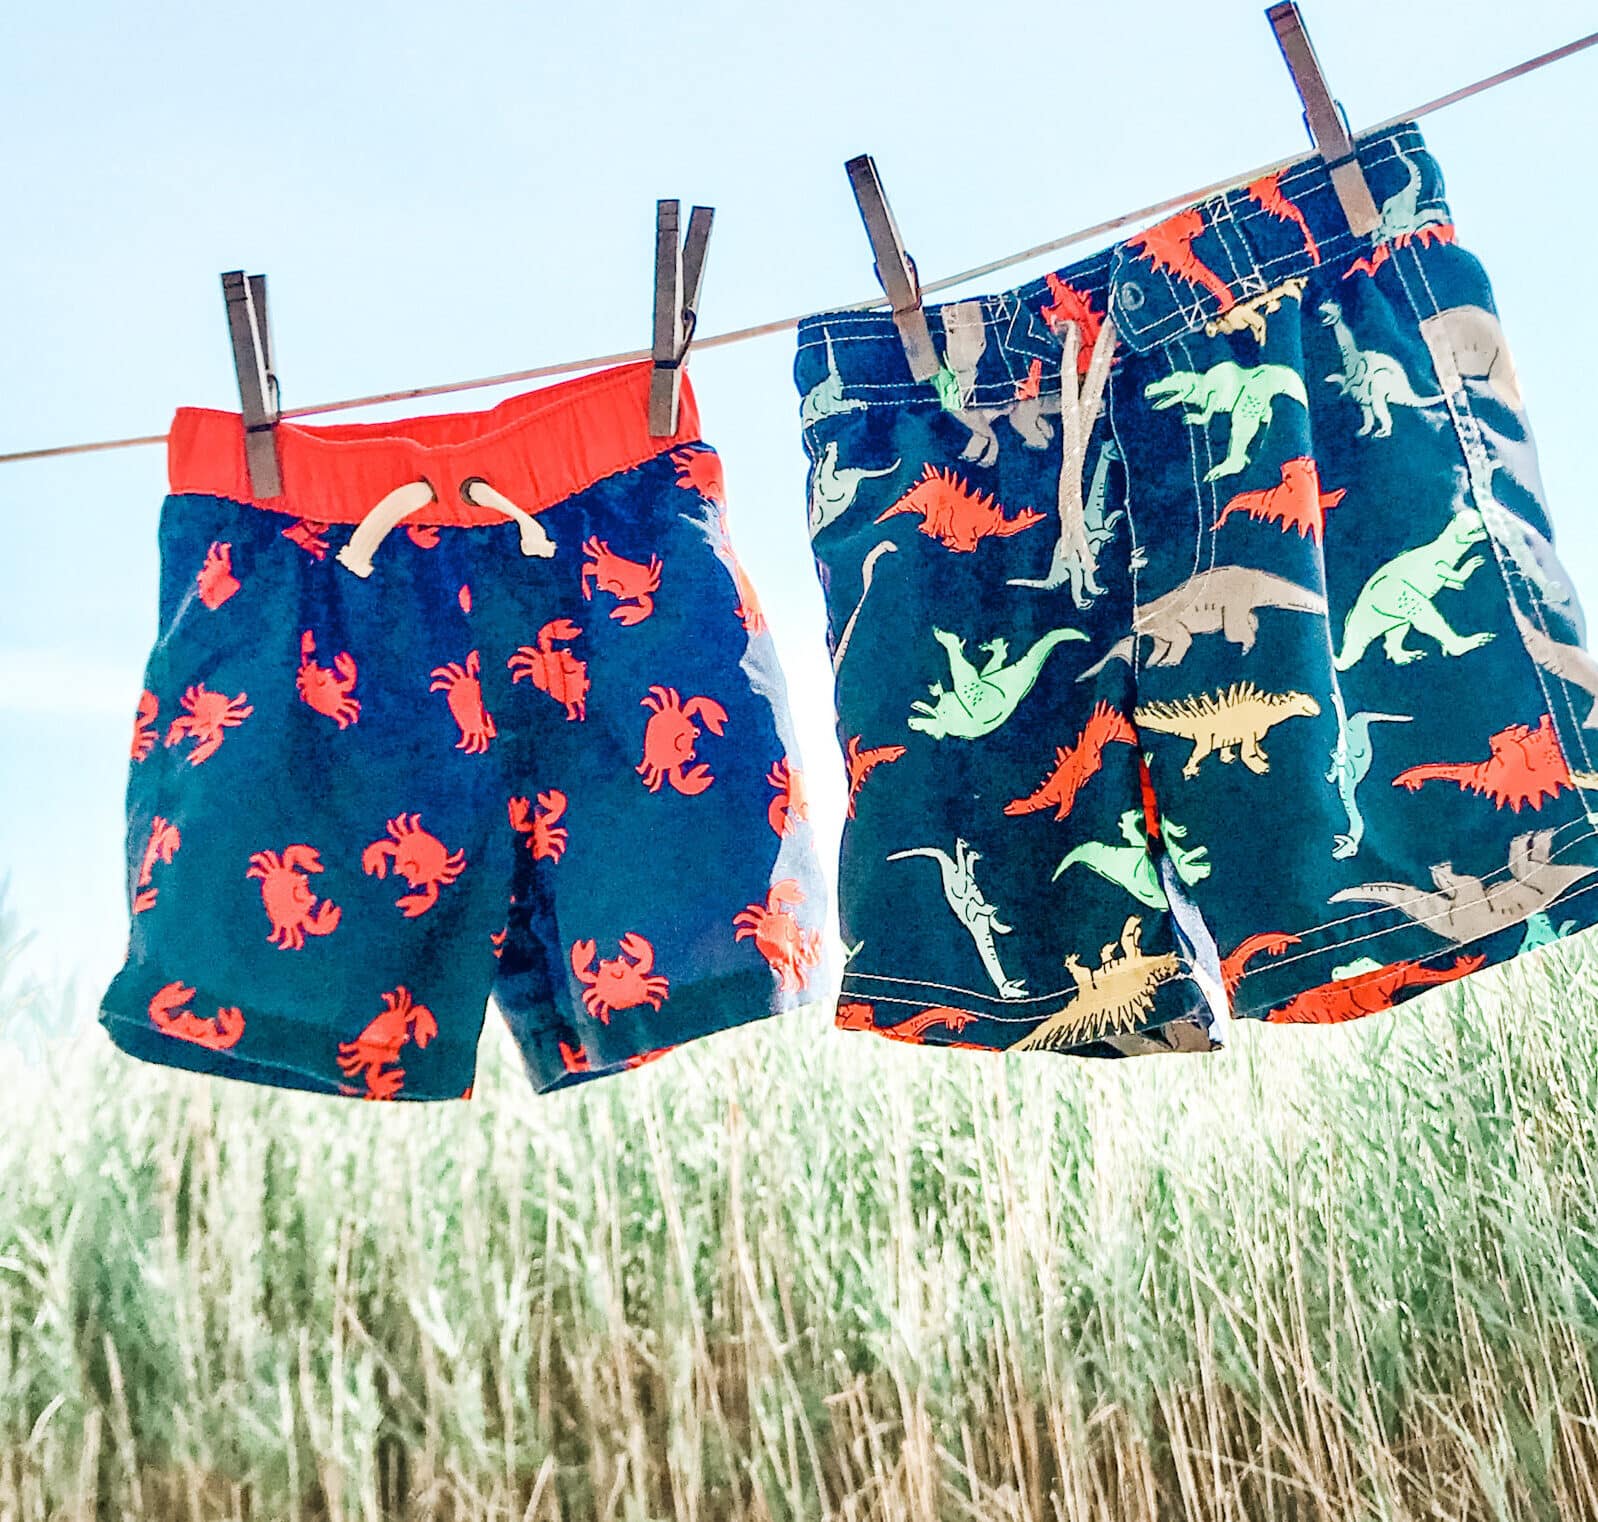 Boys bathing suits on a clothesline with grass in background